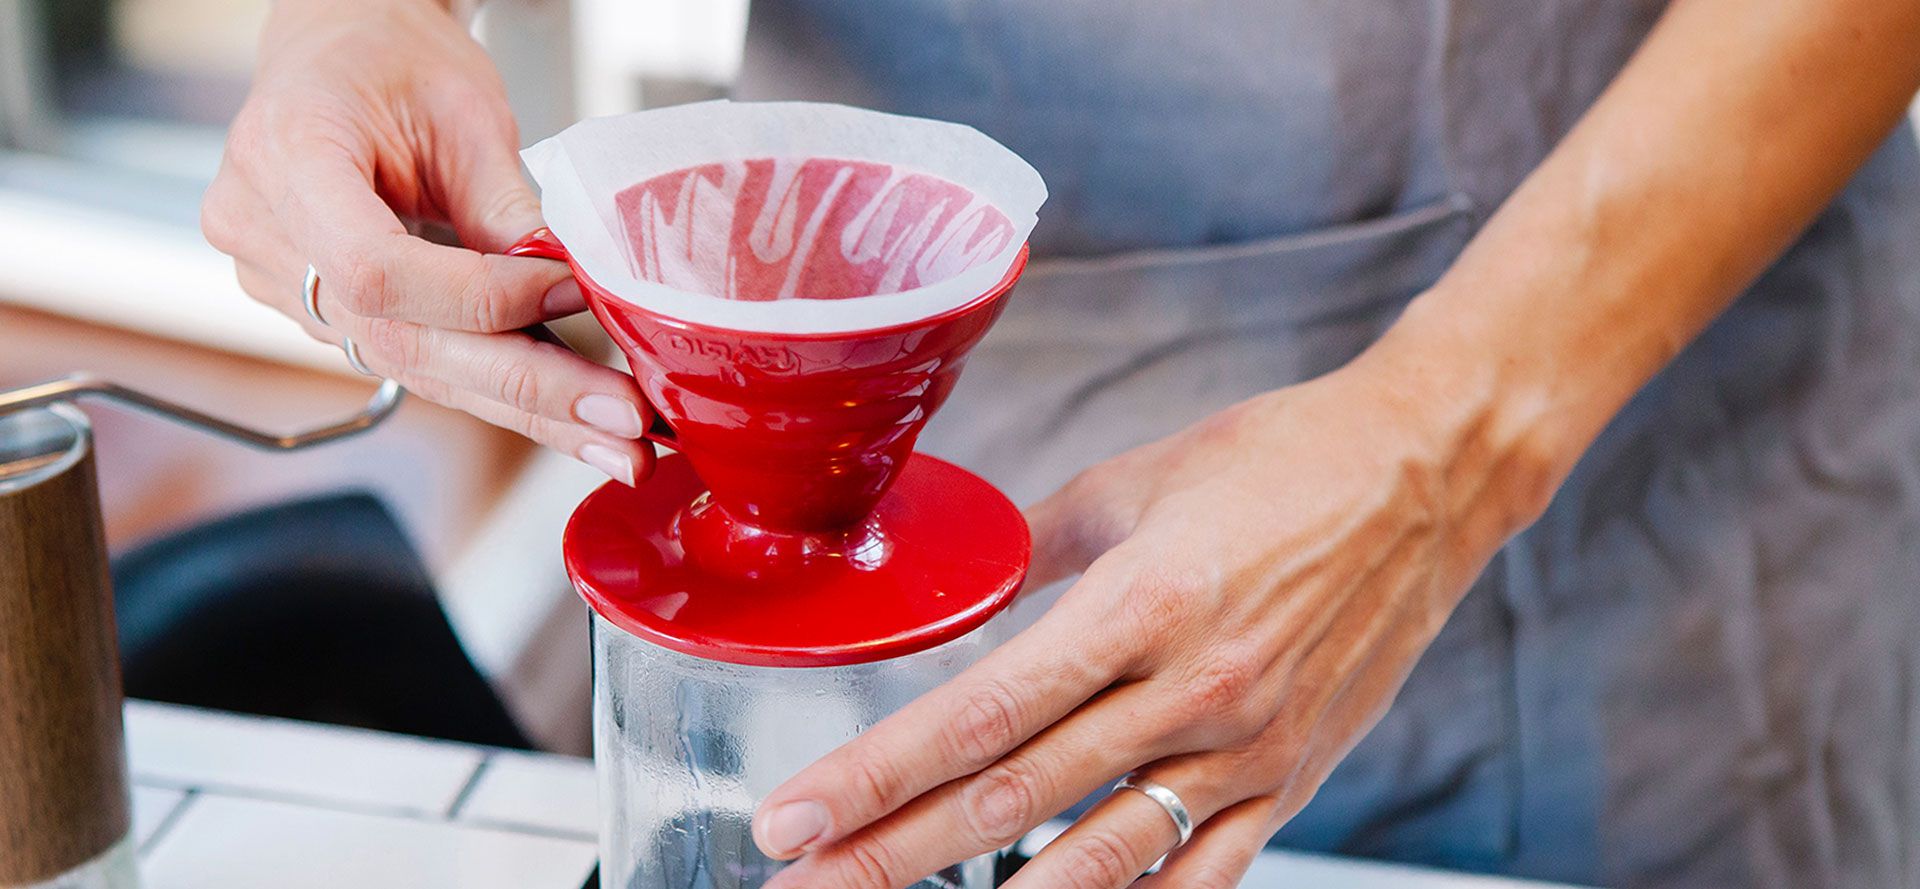 Red Pour Over Maker.